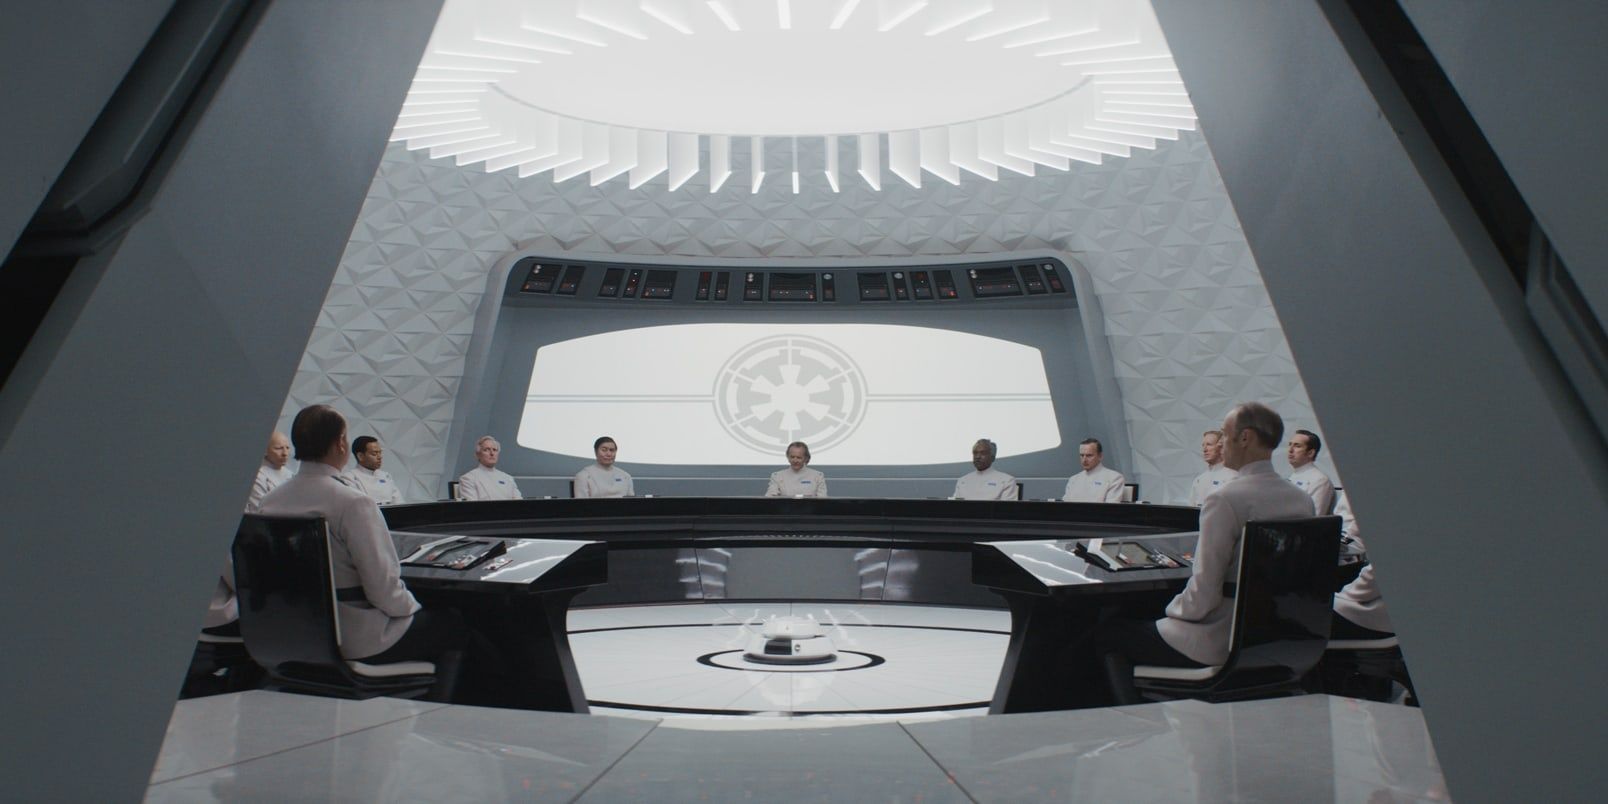 A meeting room from the Imperial Security Bureau, seen in Andor